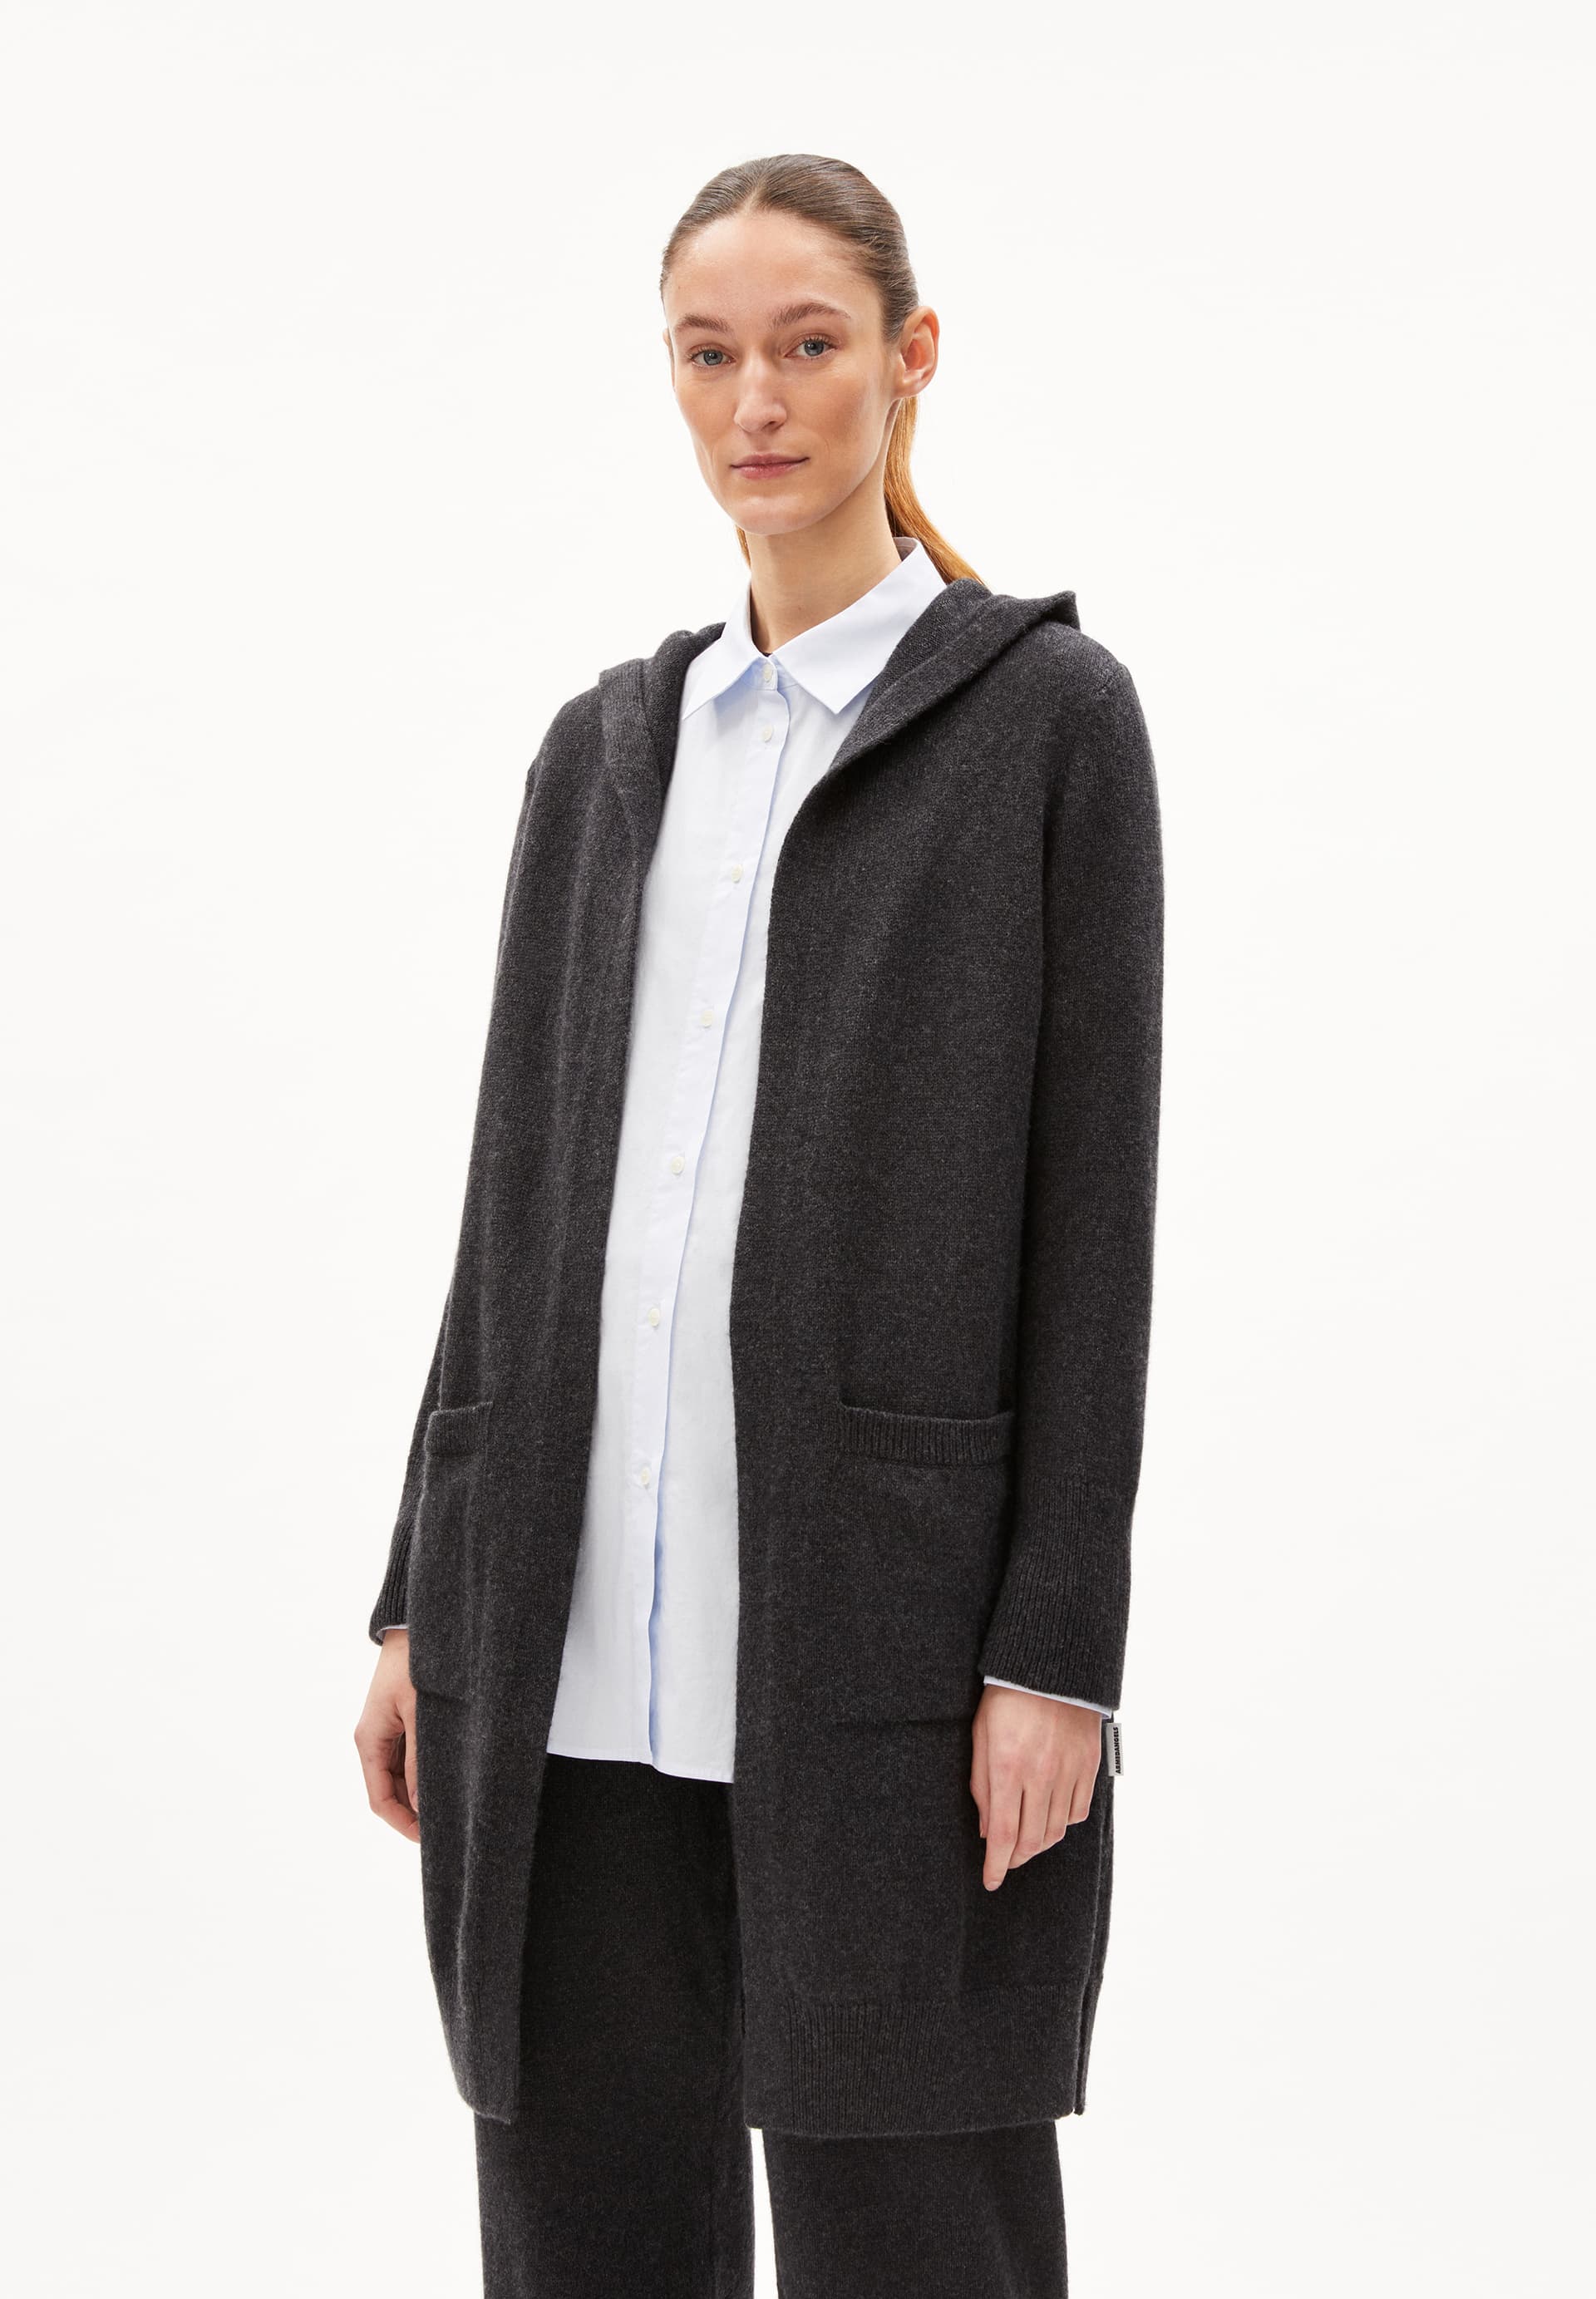 WARMAA Cardigan Relaxed Fit made of Organic Wool Mix